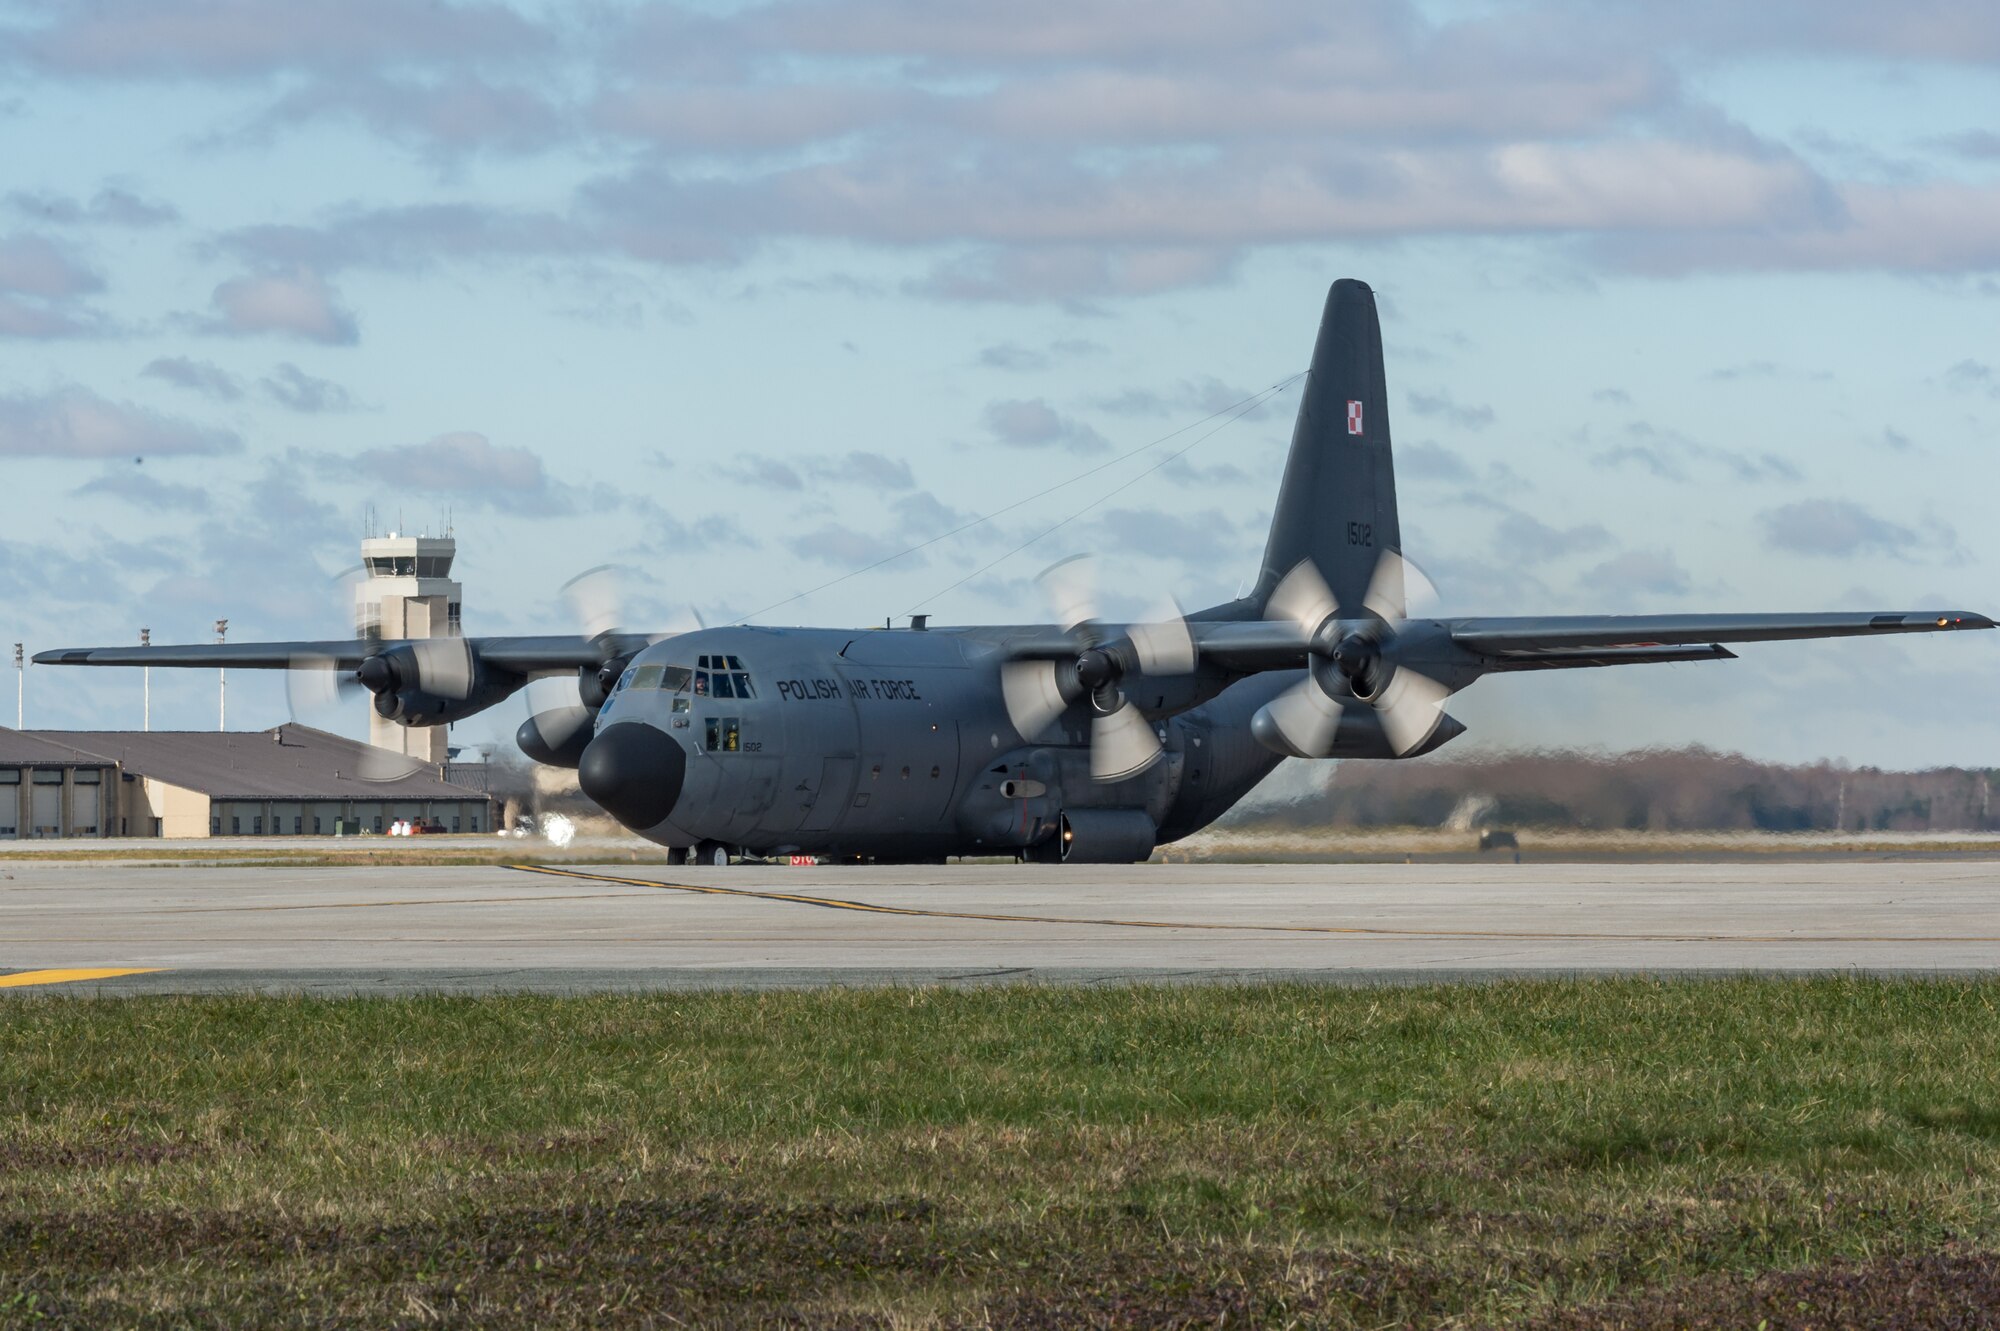 As part of a foreign military sales mission, a Polish air force C-130E Hercules taxis to a parking spot after landing to be unloaded by Airmen from the 436th Aerial Port Squadron Dec. 17, 2020, at Dover Air Force Base, Delaware. The United States and Poland have enjoyed warm bilateral relations since 1989. Poland is a stalwart NATO ally, and both the U.S. and Poland remain committed to the regional security and prosperity of Europe. Due to its strategic location, Dover AFB supports approximately $3.5 billion worth of foreign military sales annually. (U.S. Air Force photo by Roland Balik)